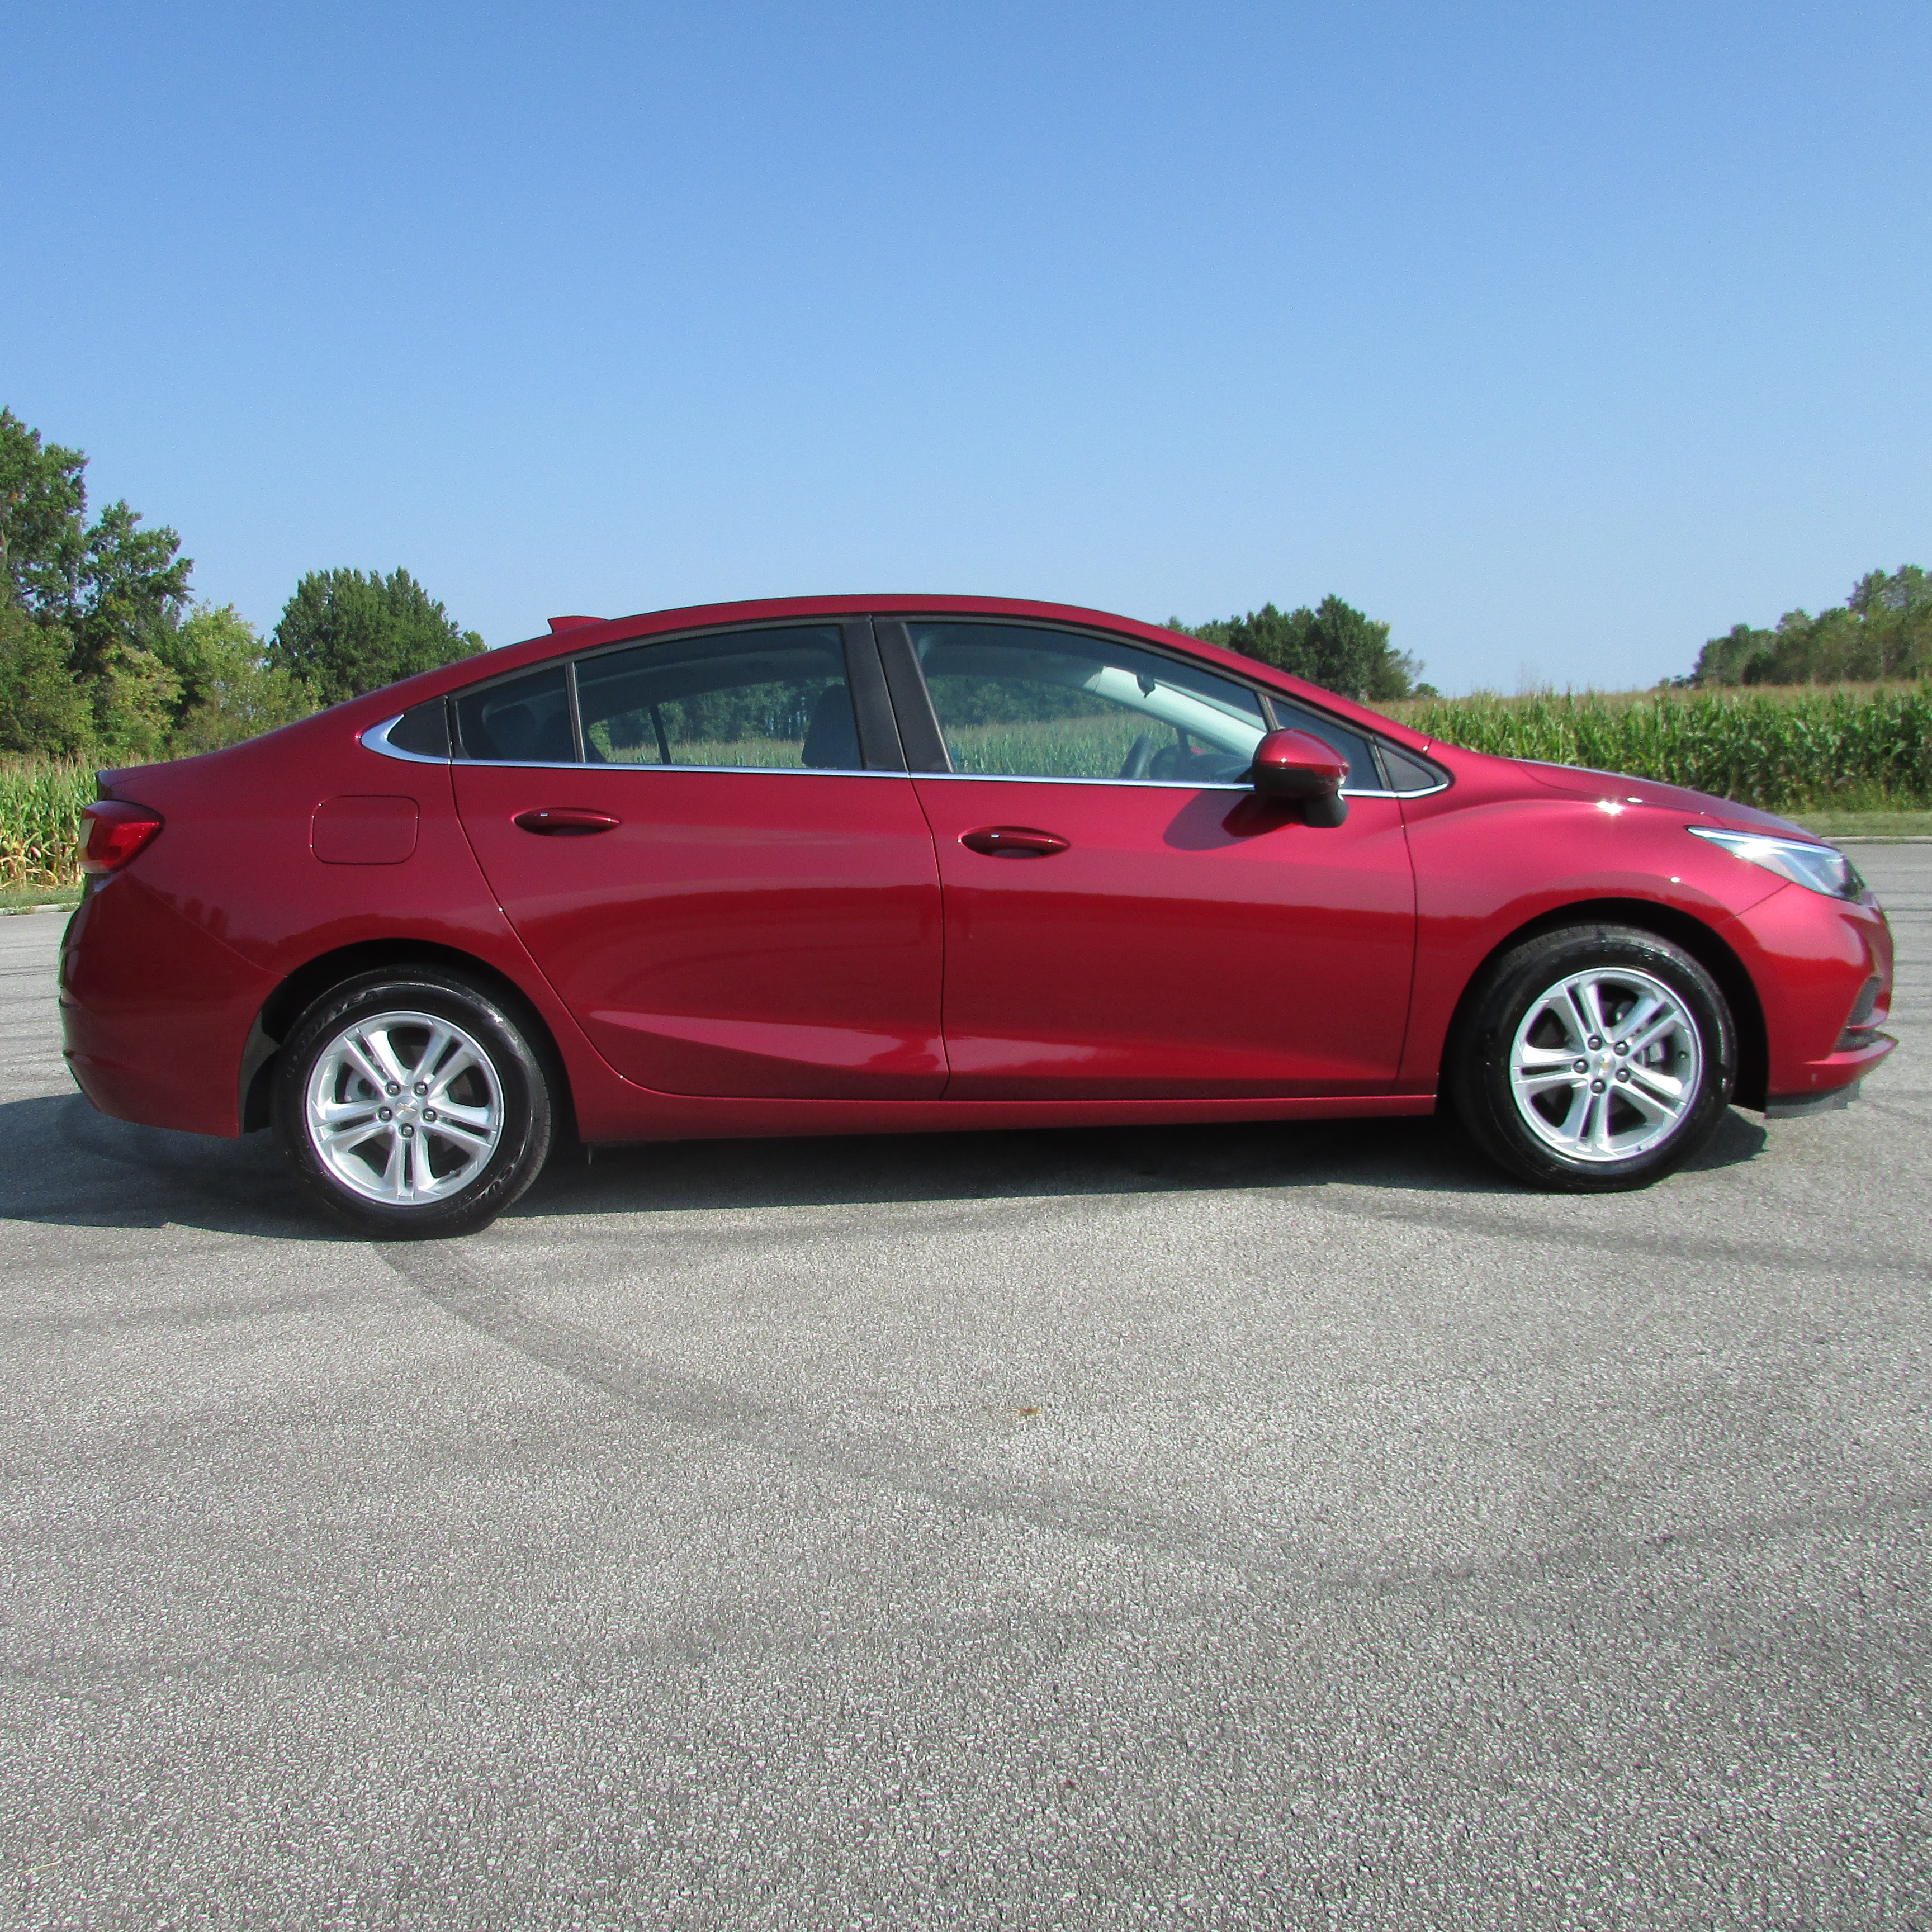 Chevrolet Cruze hd specifications